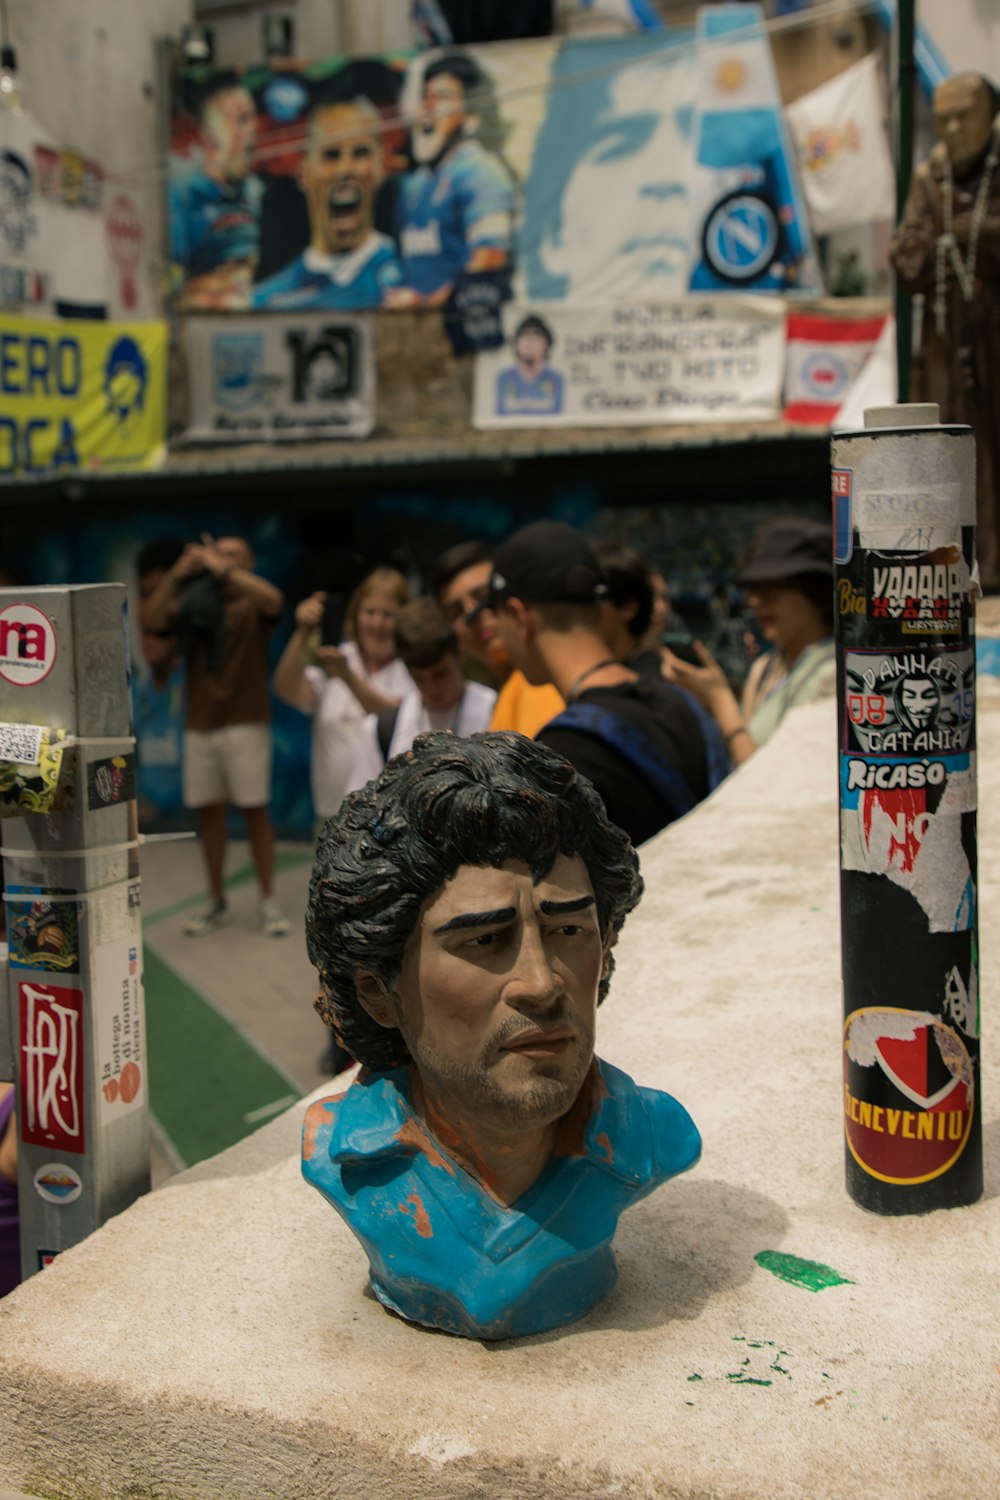 a busturine of a man is on display in a store